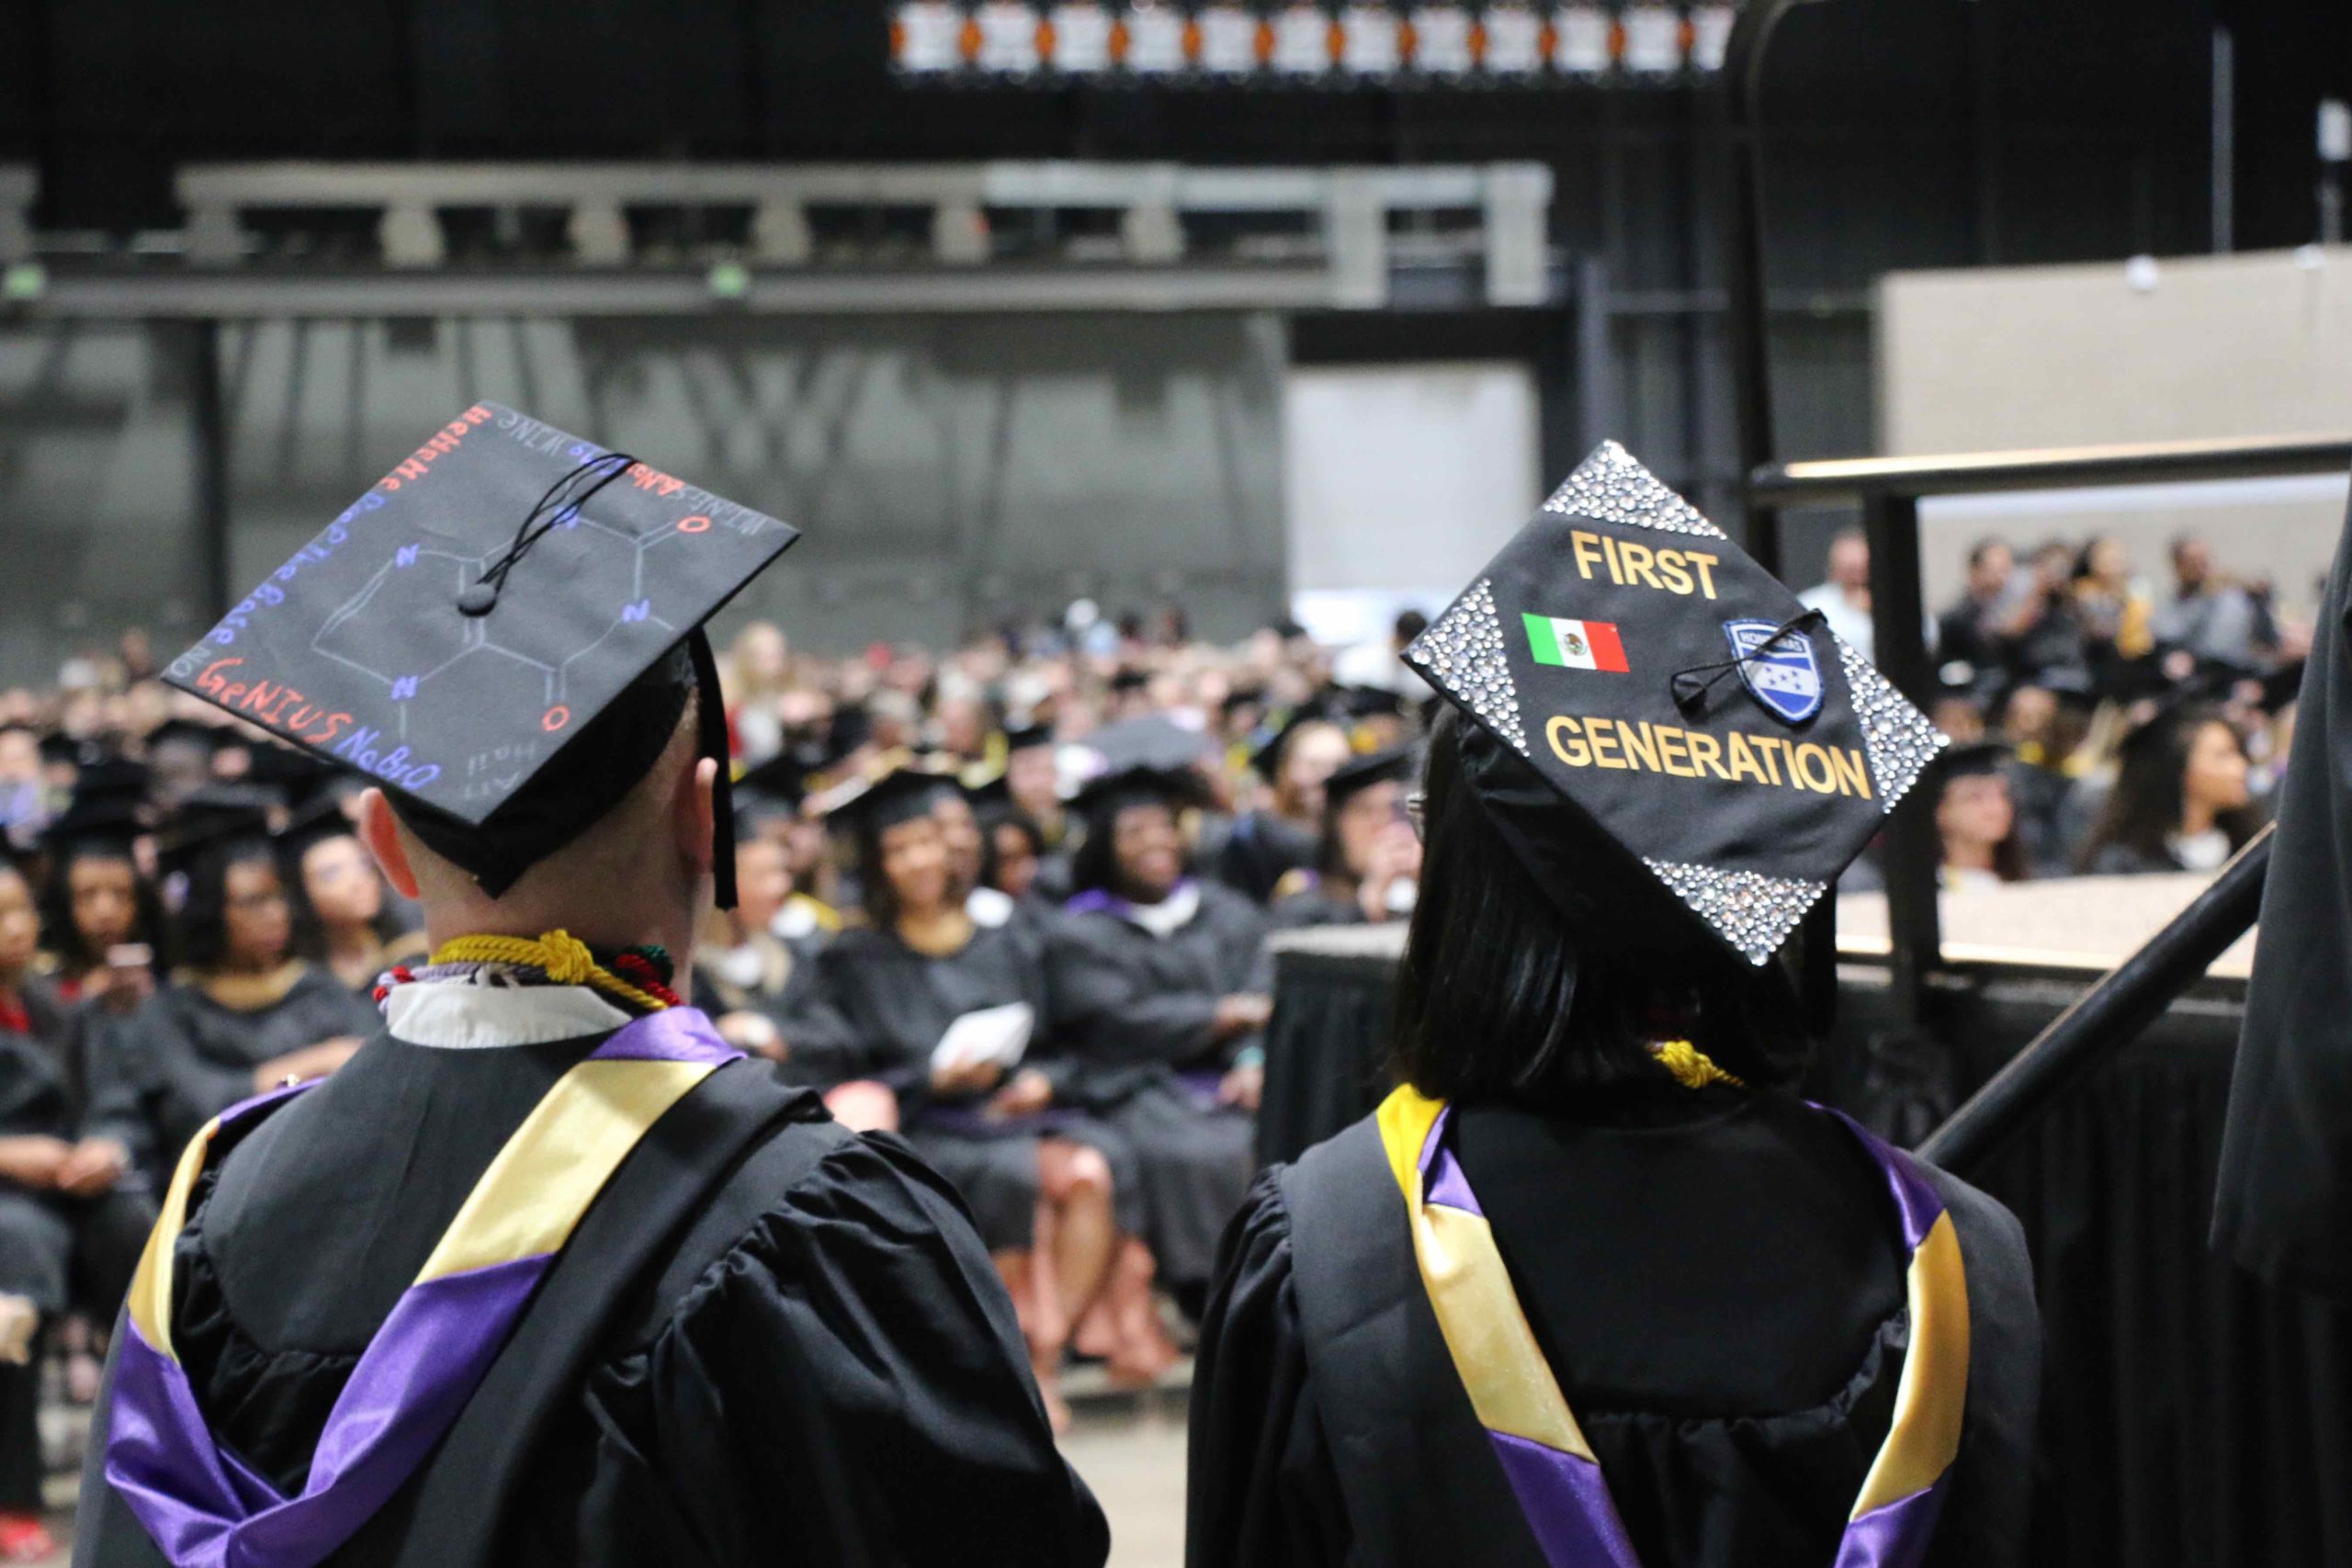 Student looking at the crowd of graduates in their caps and gowns. Her cap reads "First Generation"